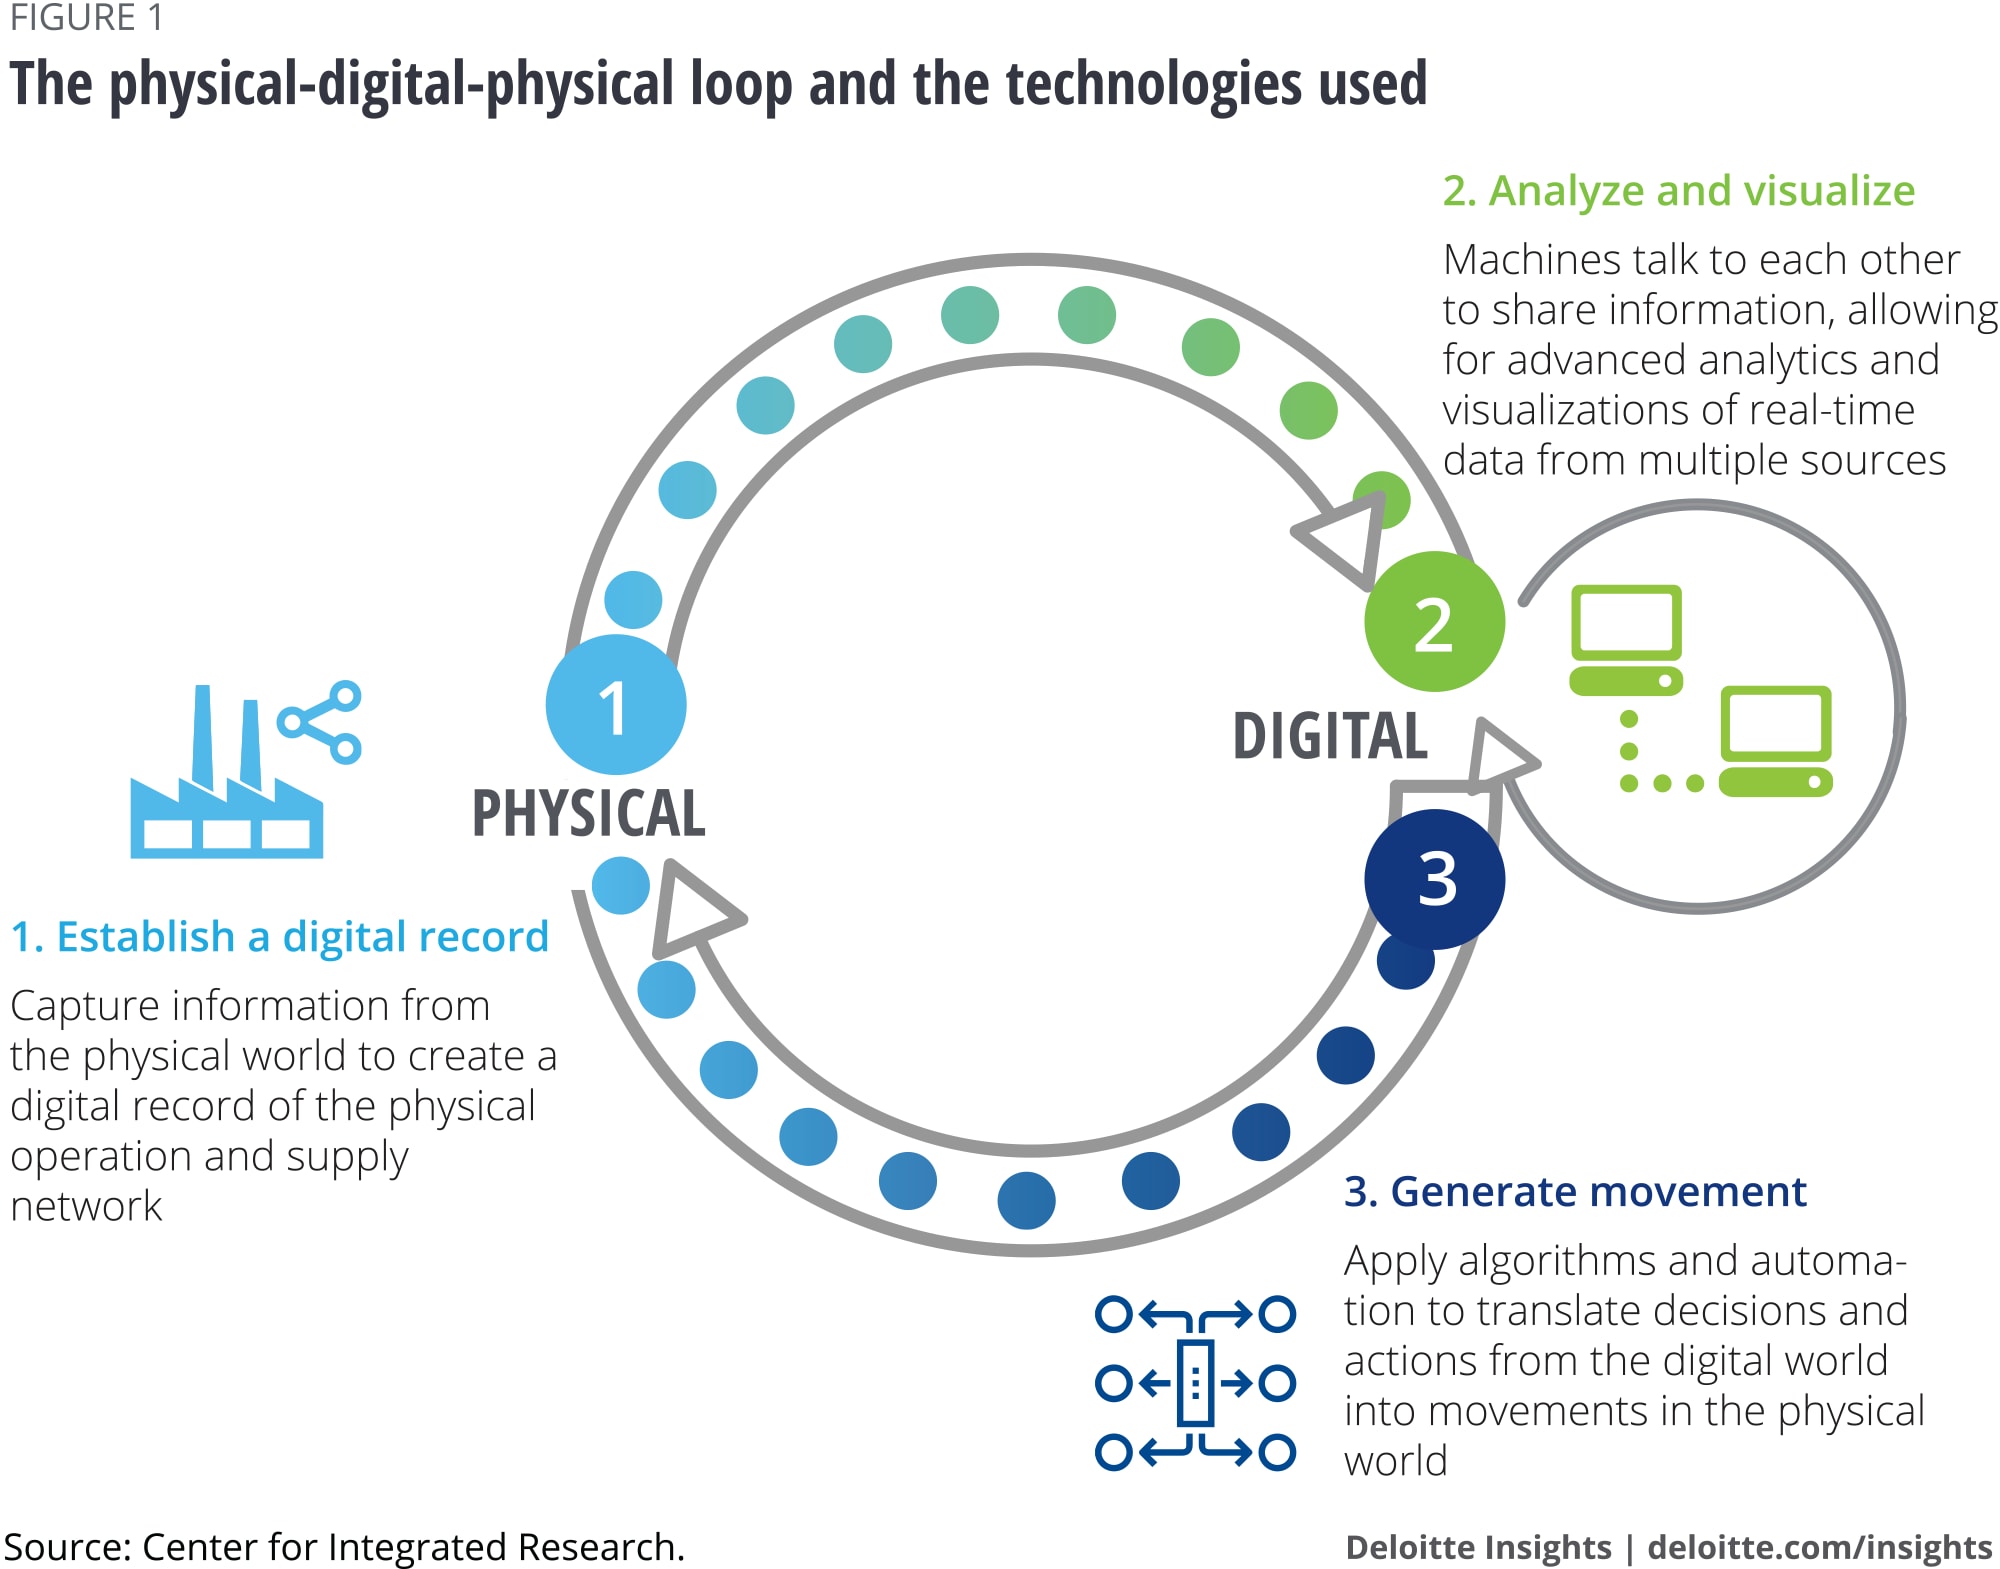 The physical-digital-physical loop and the technologies used